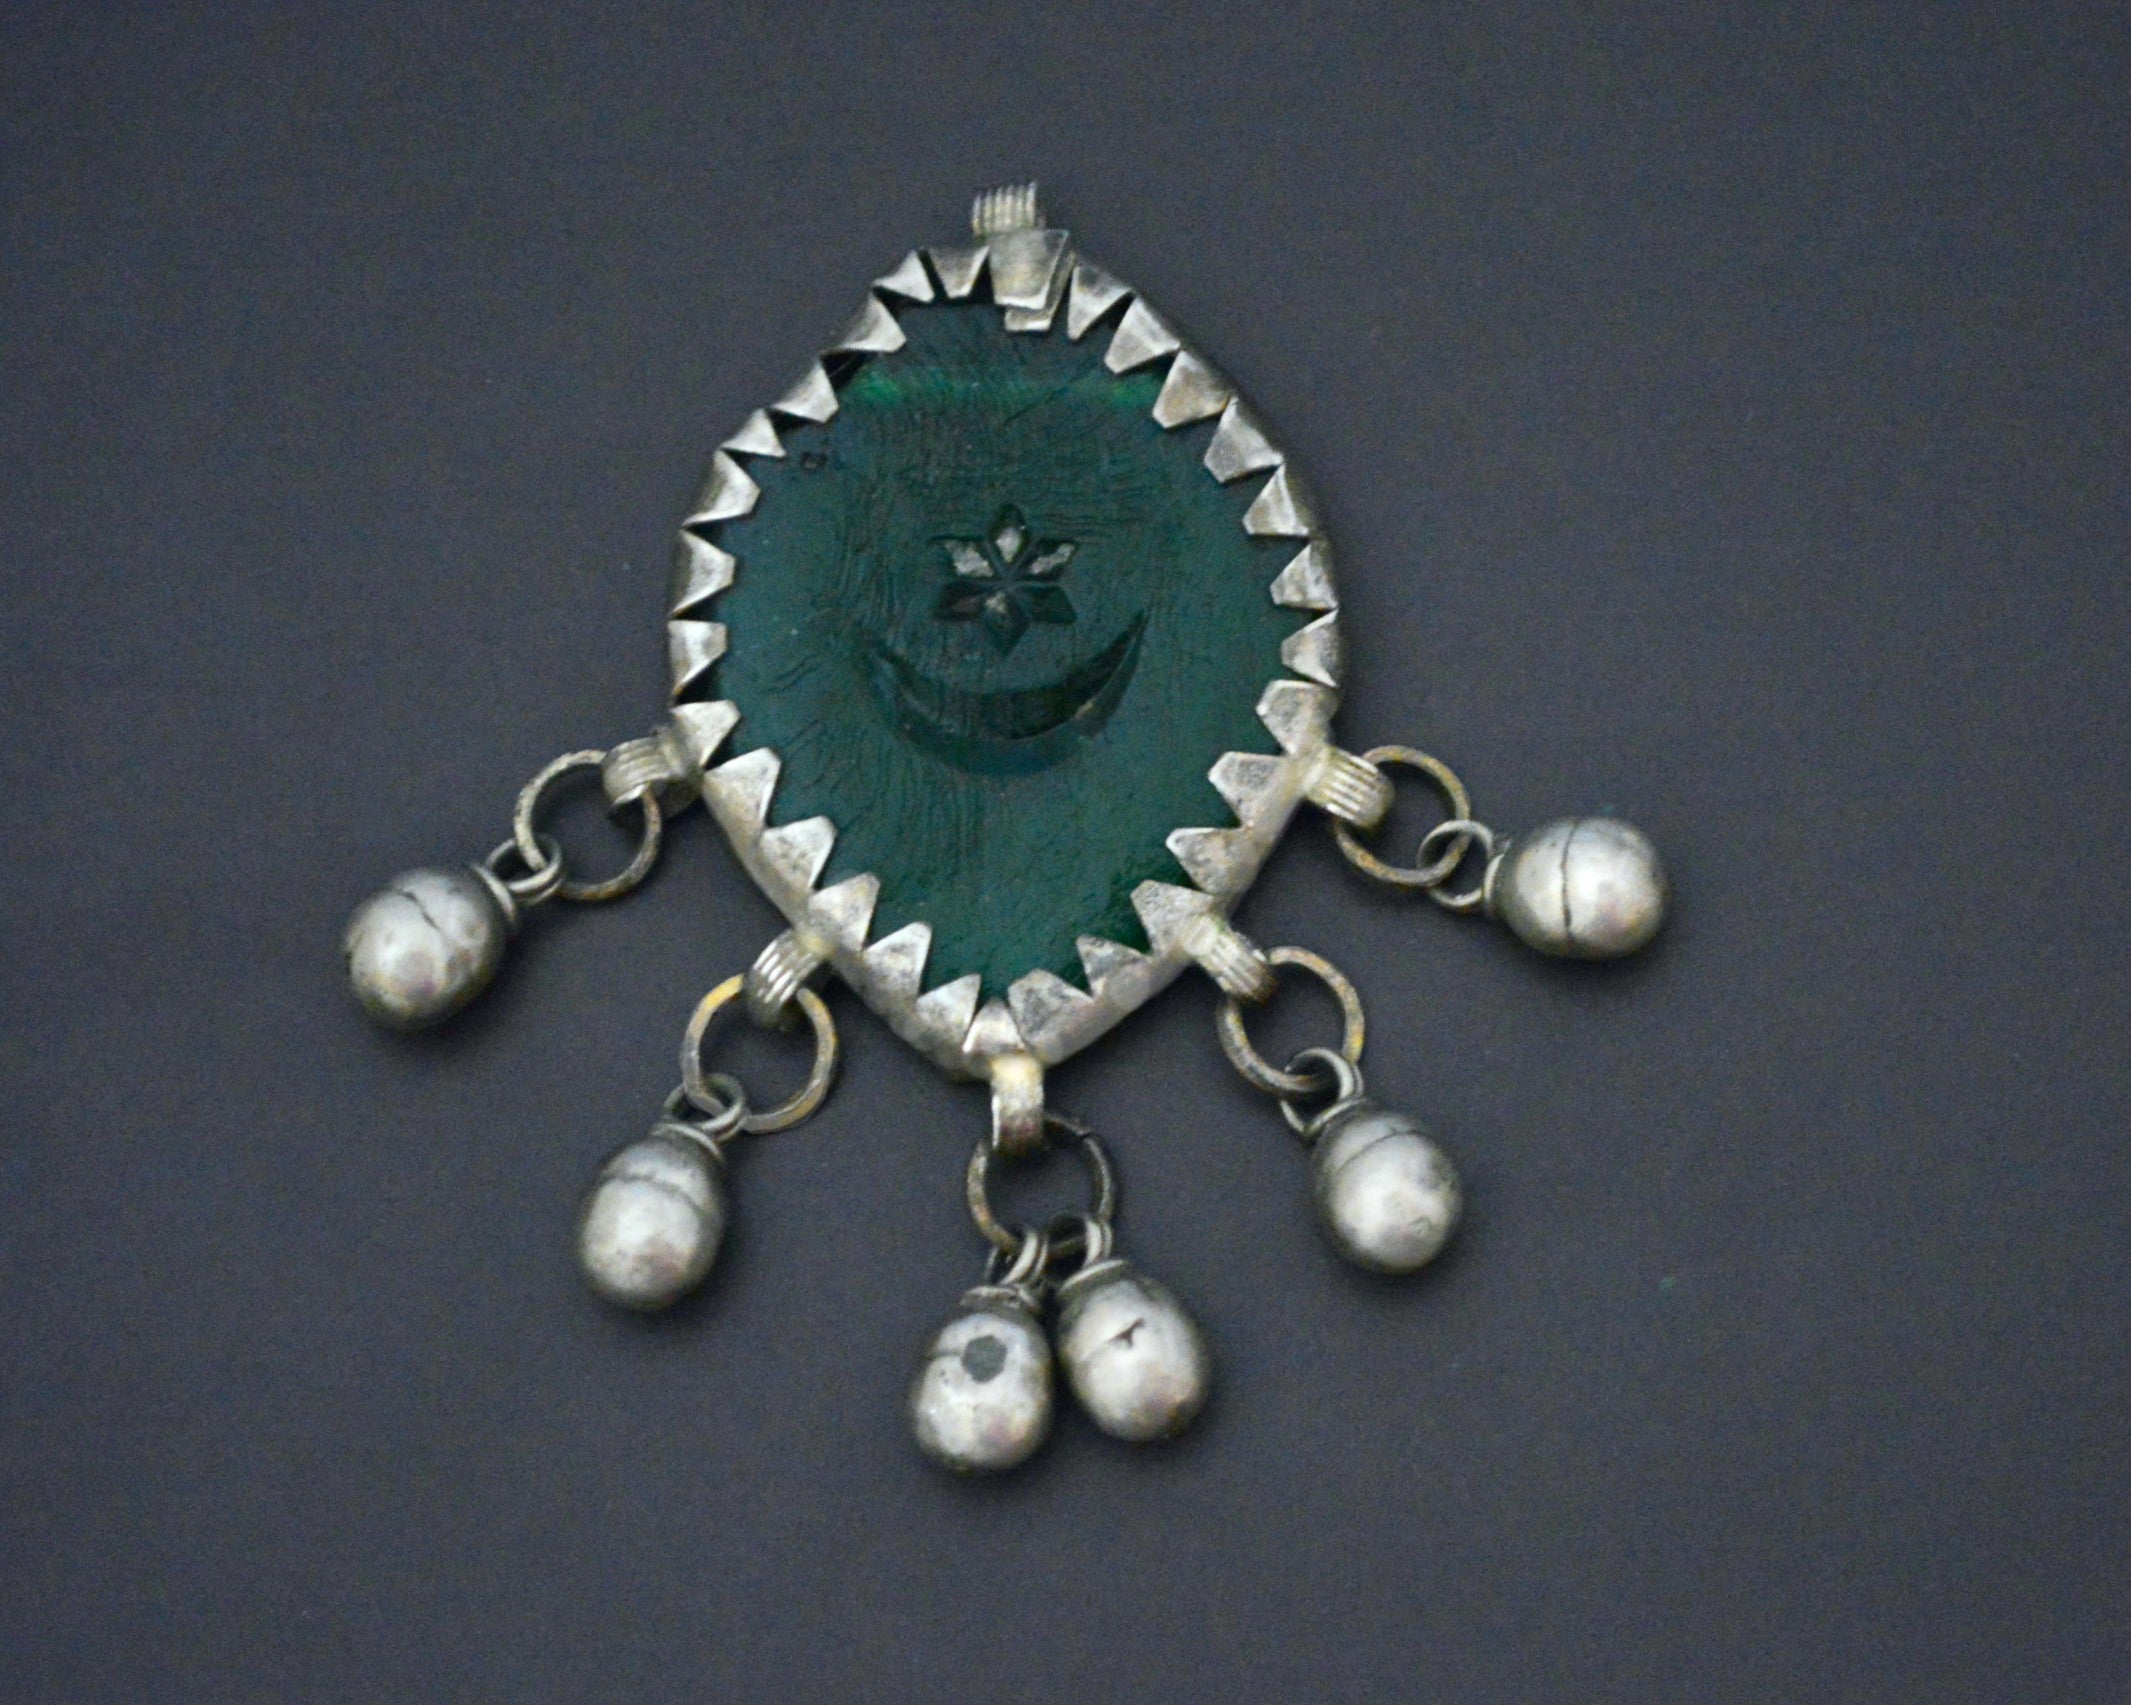 Crescent and Star Glass Pendant from Siwa Oasis Egypt